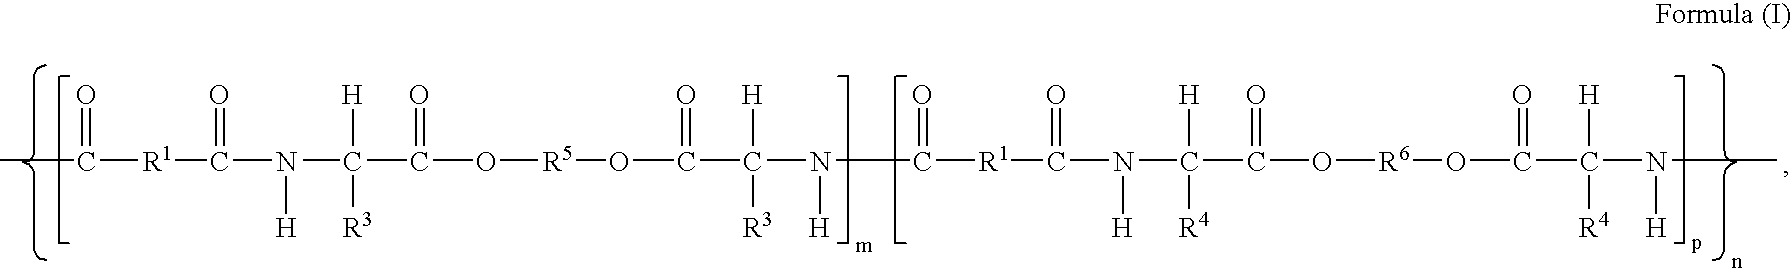 Bis-(Alpha-Amino)-Diol-Diester-Containing Poly (Ester Amide) and Poly (Ester Urethane) Compositions and Methods of Use